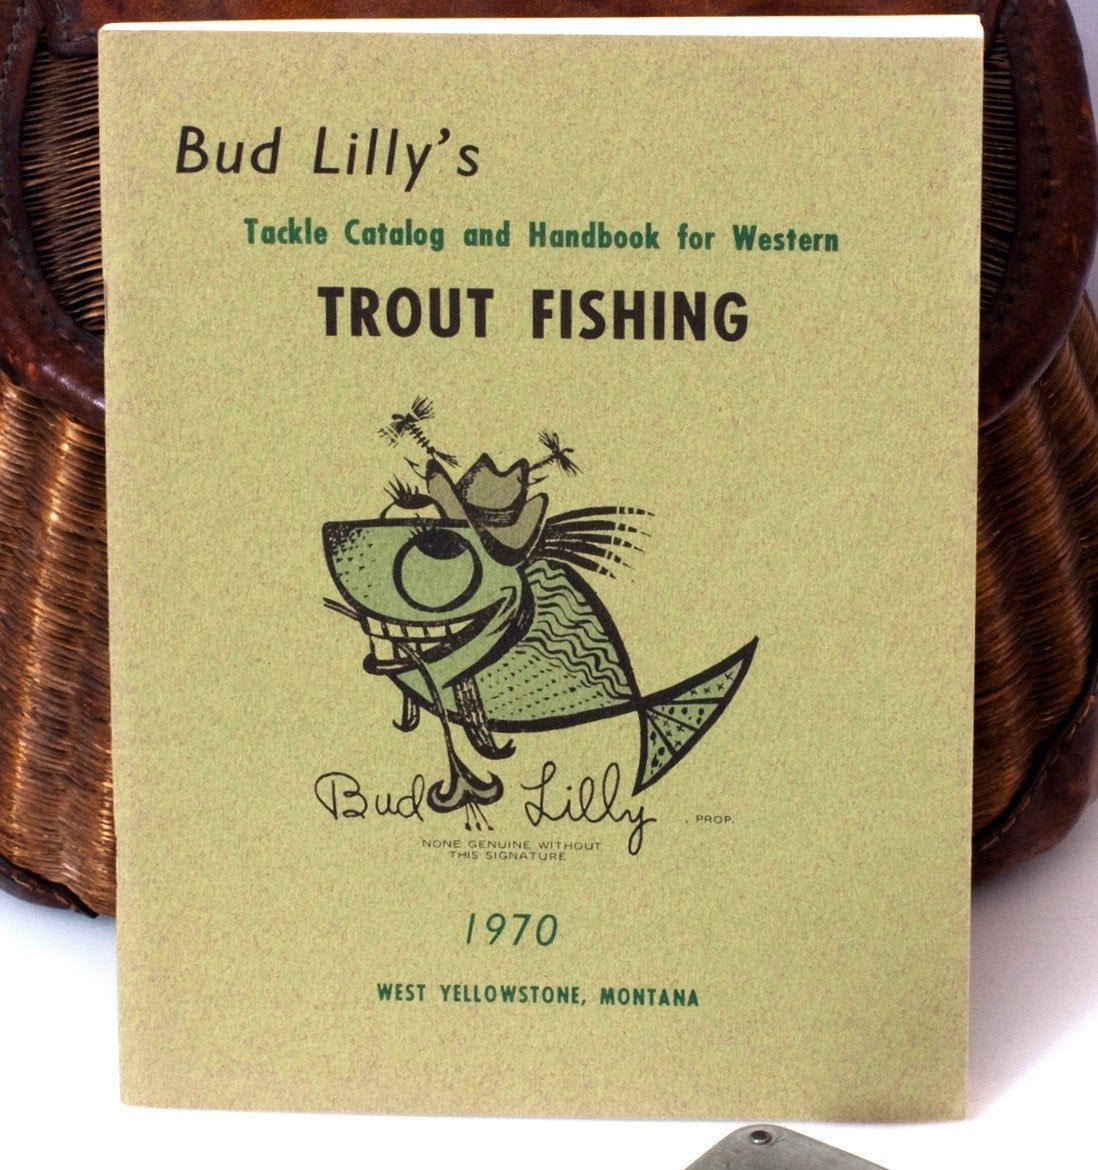 Bud Lilly's 1970 Tackle Catalog 